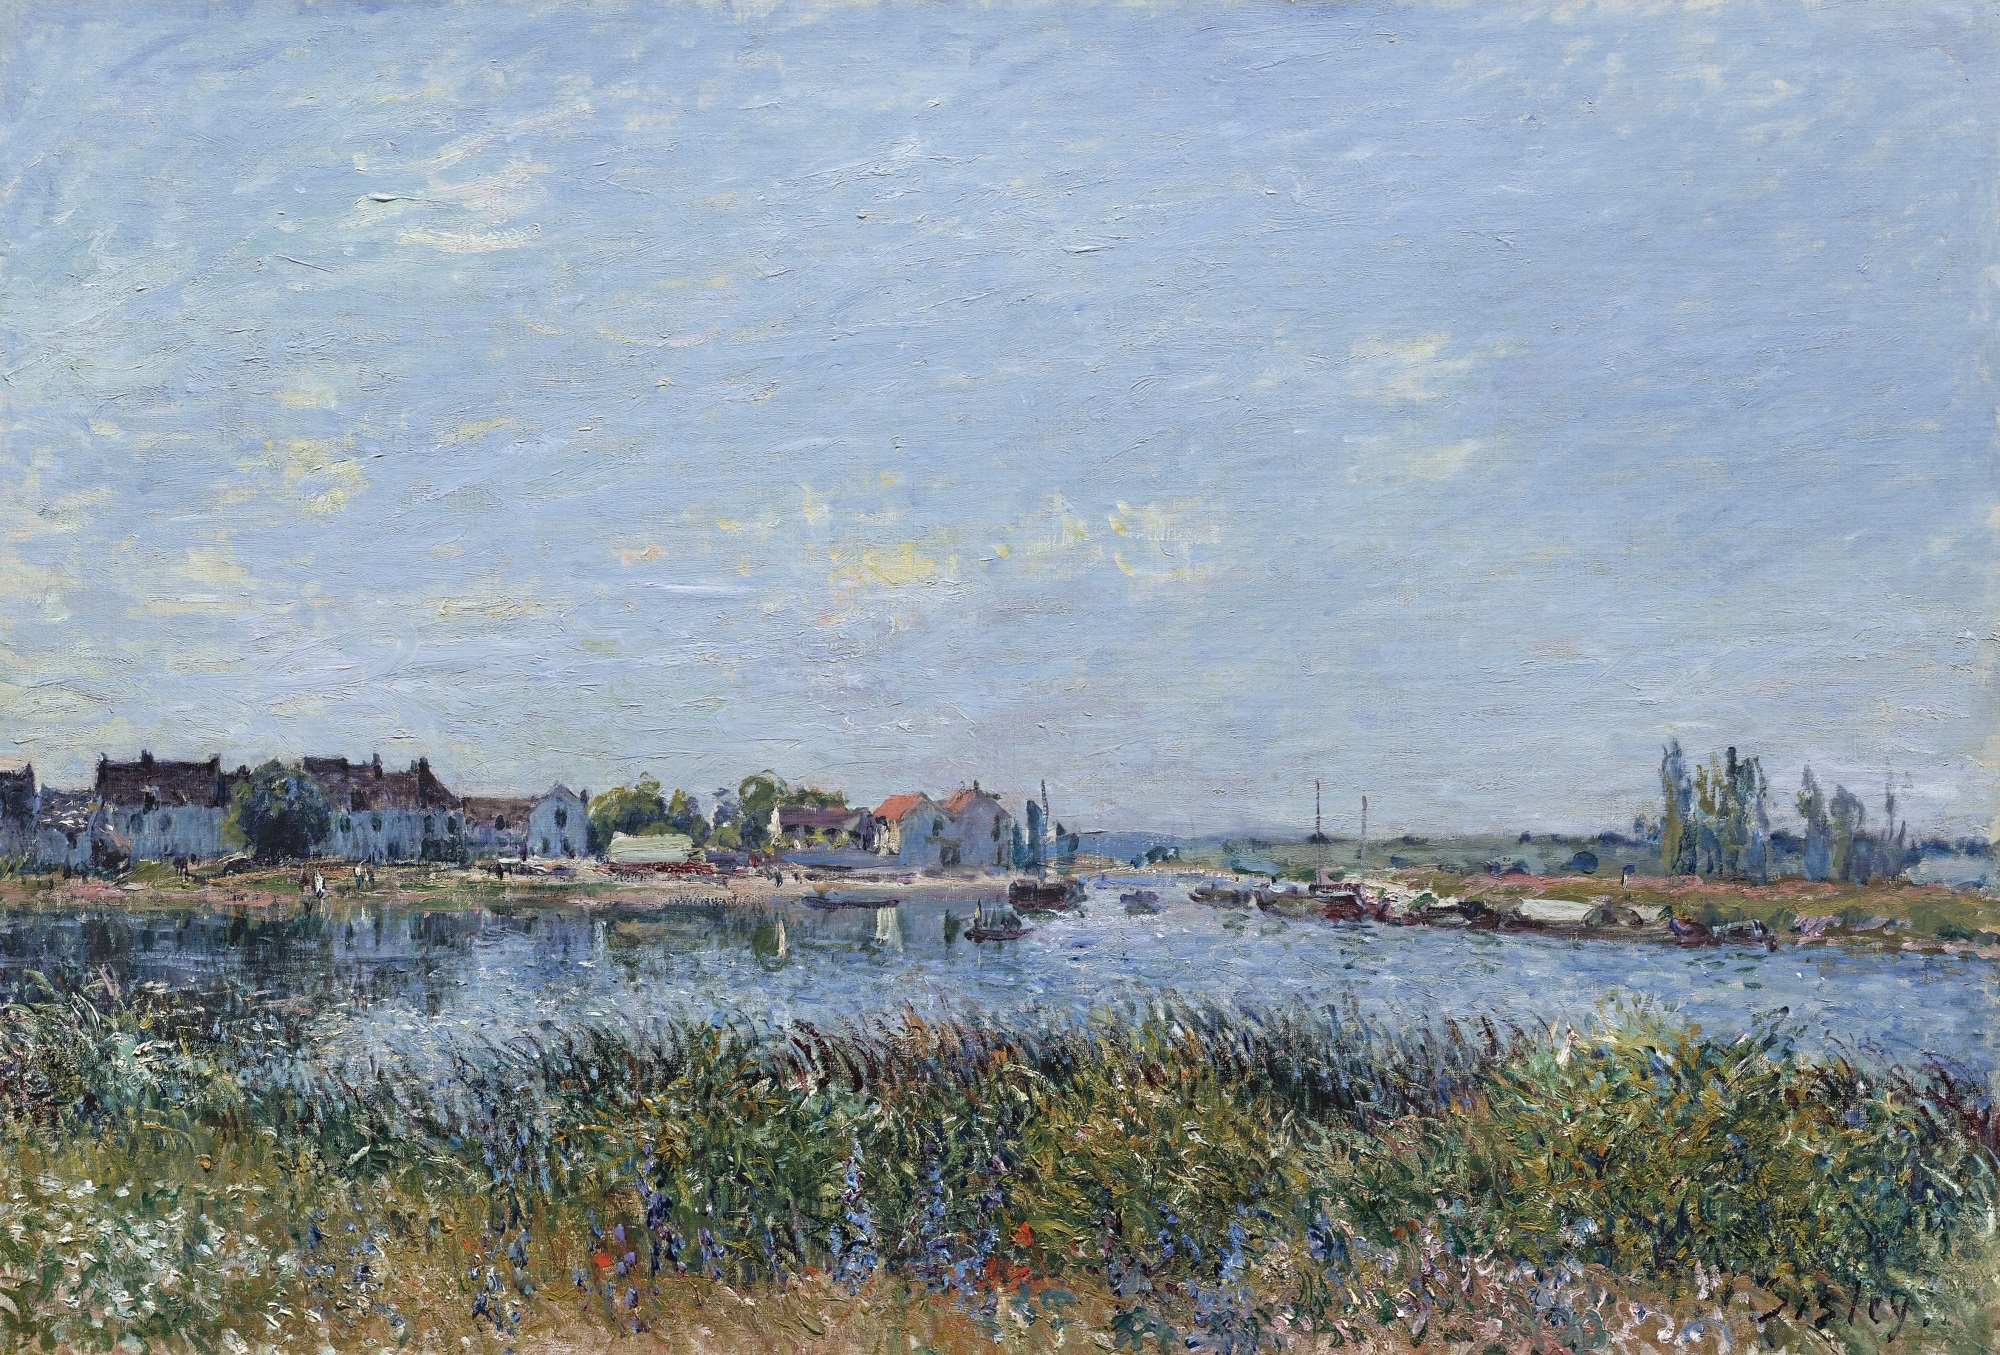 Saint-Mammès le Matin by Alfred Sisley - 1881 - 19.8 × 29 in private collection